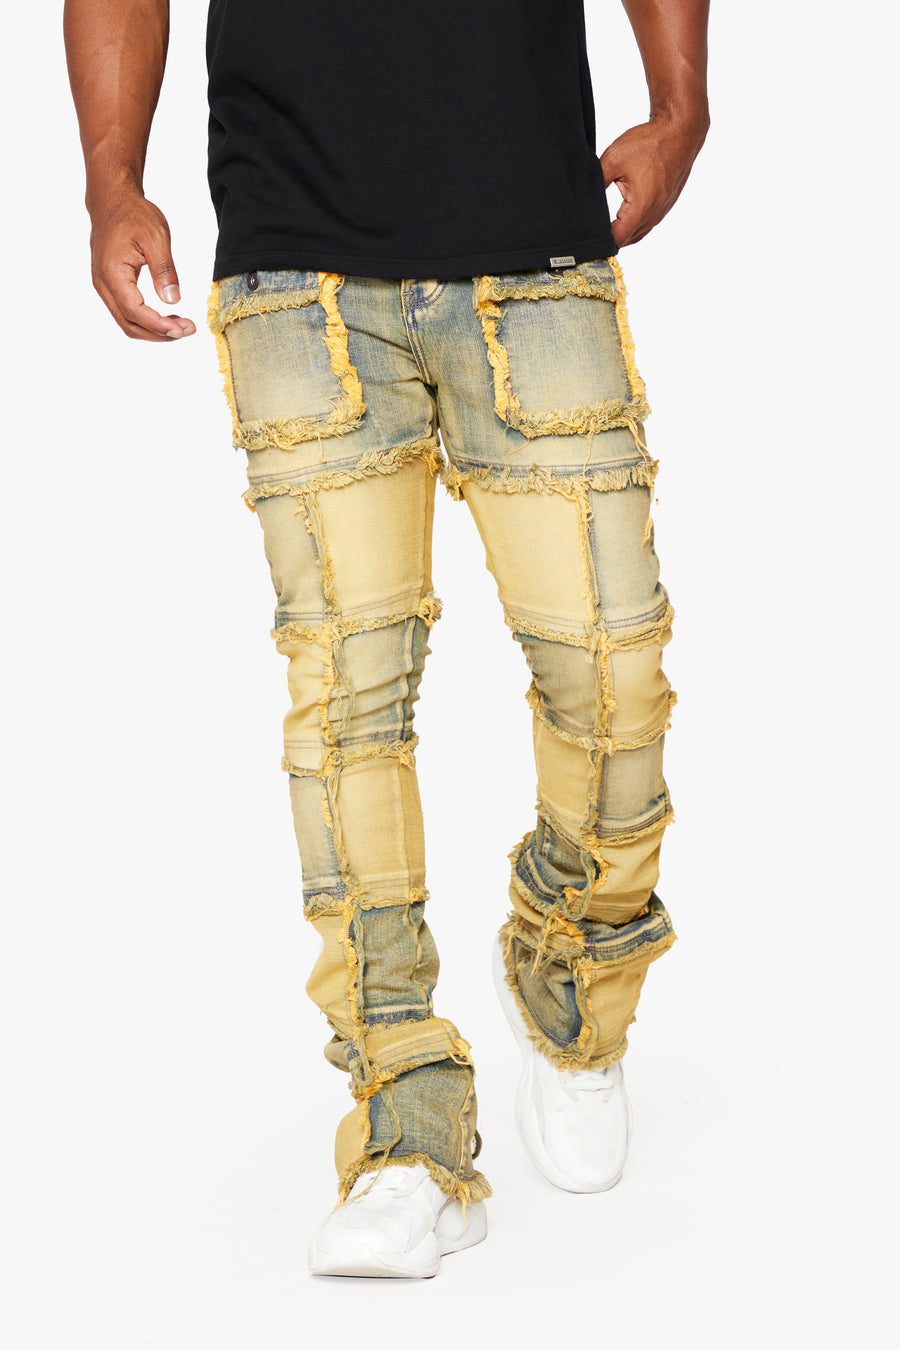 "THREADS‚Äù DIRTy VINTAGE WASH STACKED FLARE JEAN